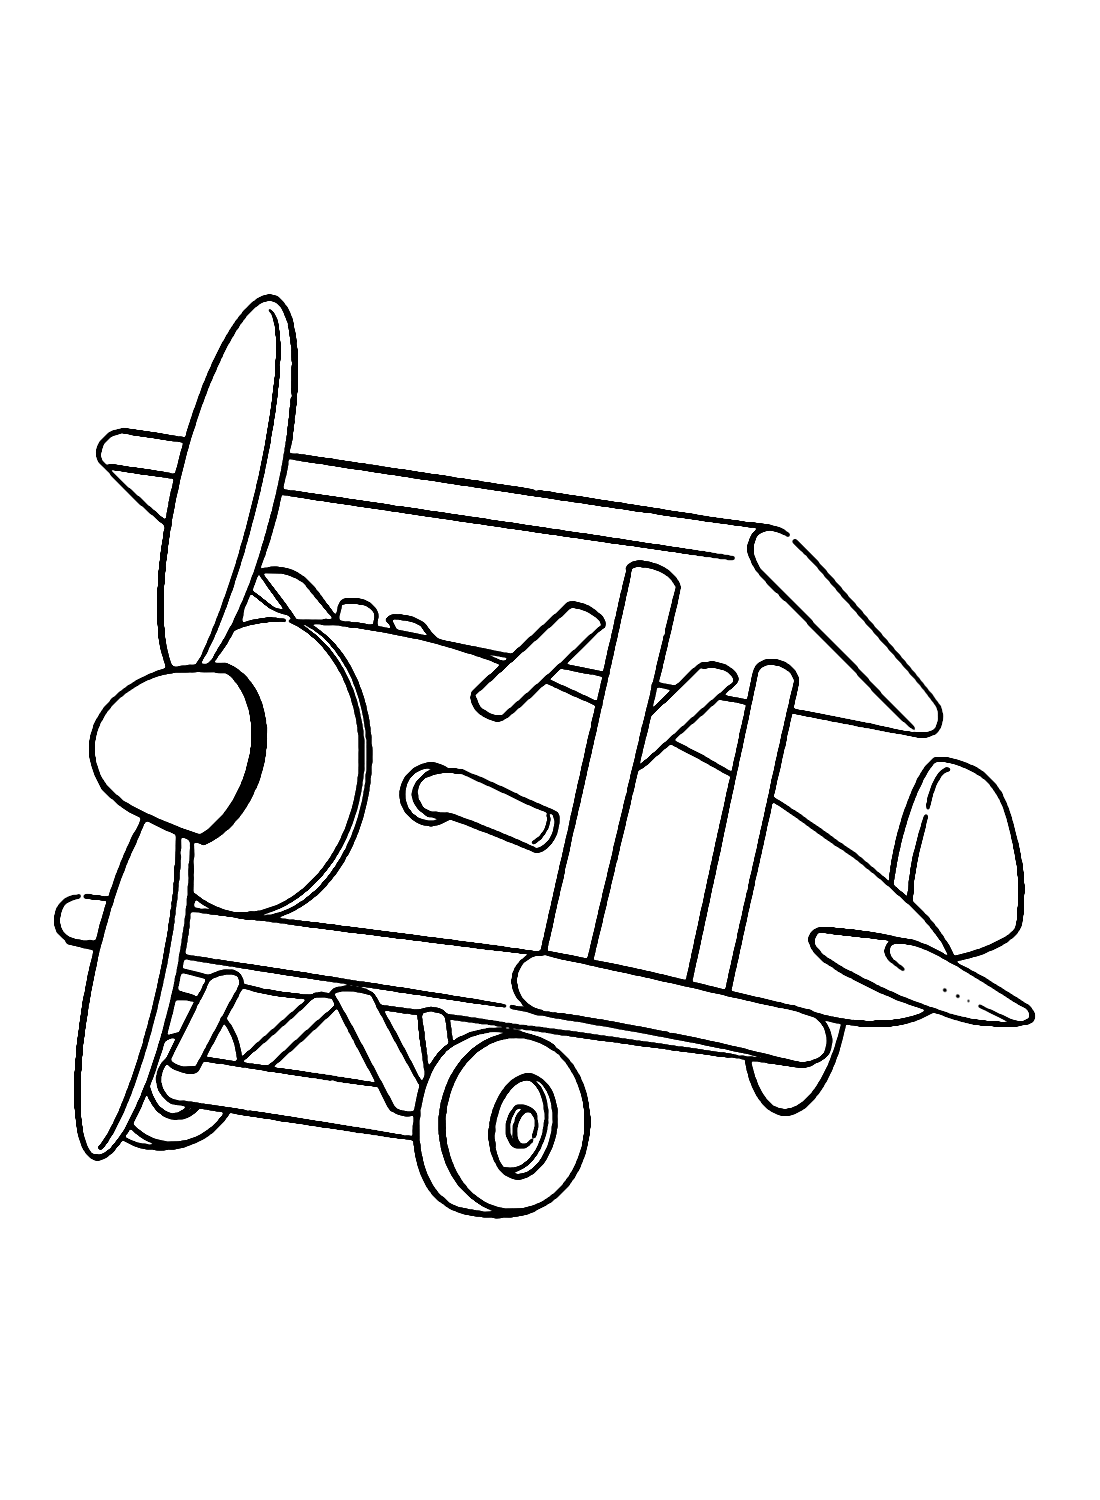 Toy Plane from Toys